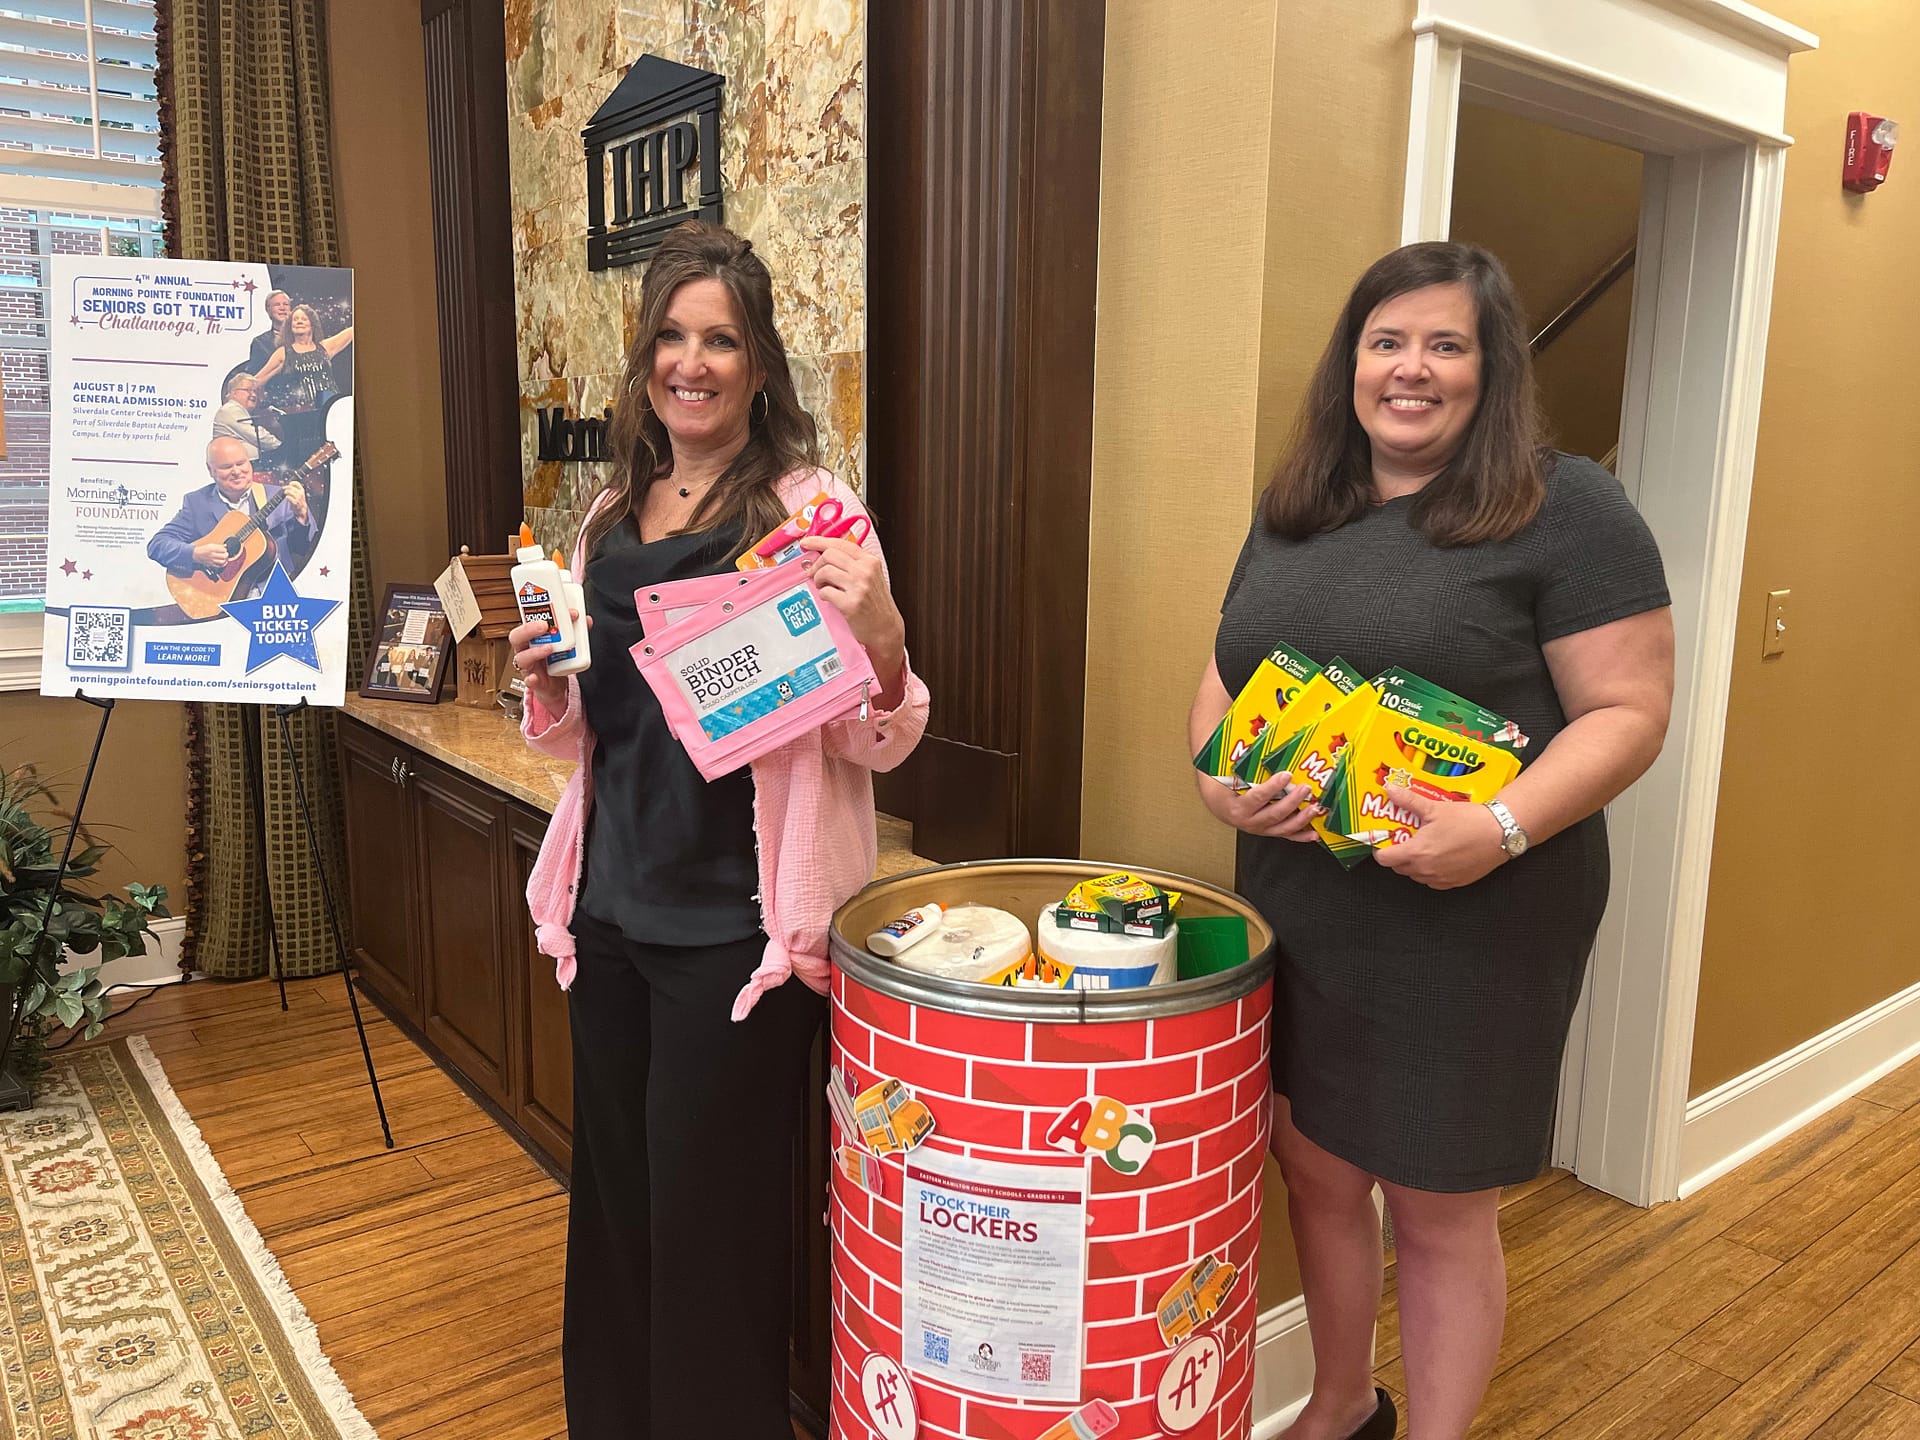 Alison Irwin, payroll coordinator, and Donna Rast, accounting coordinator, at Morning Pointe Senior Living’s home office in Ooltewah